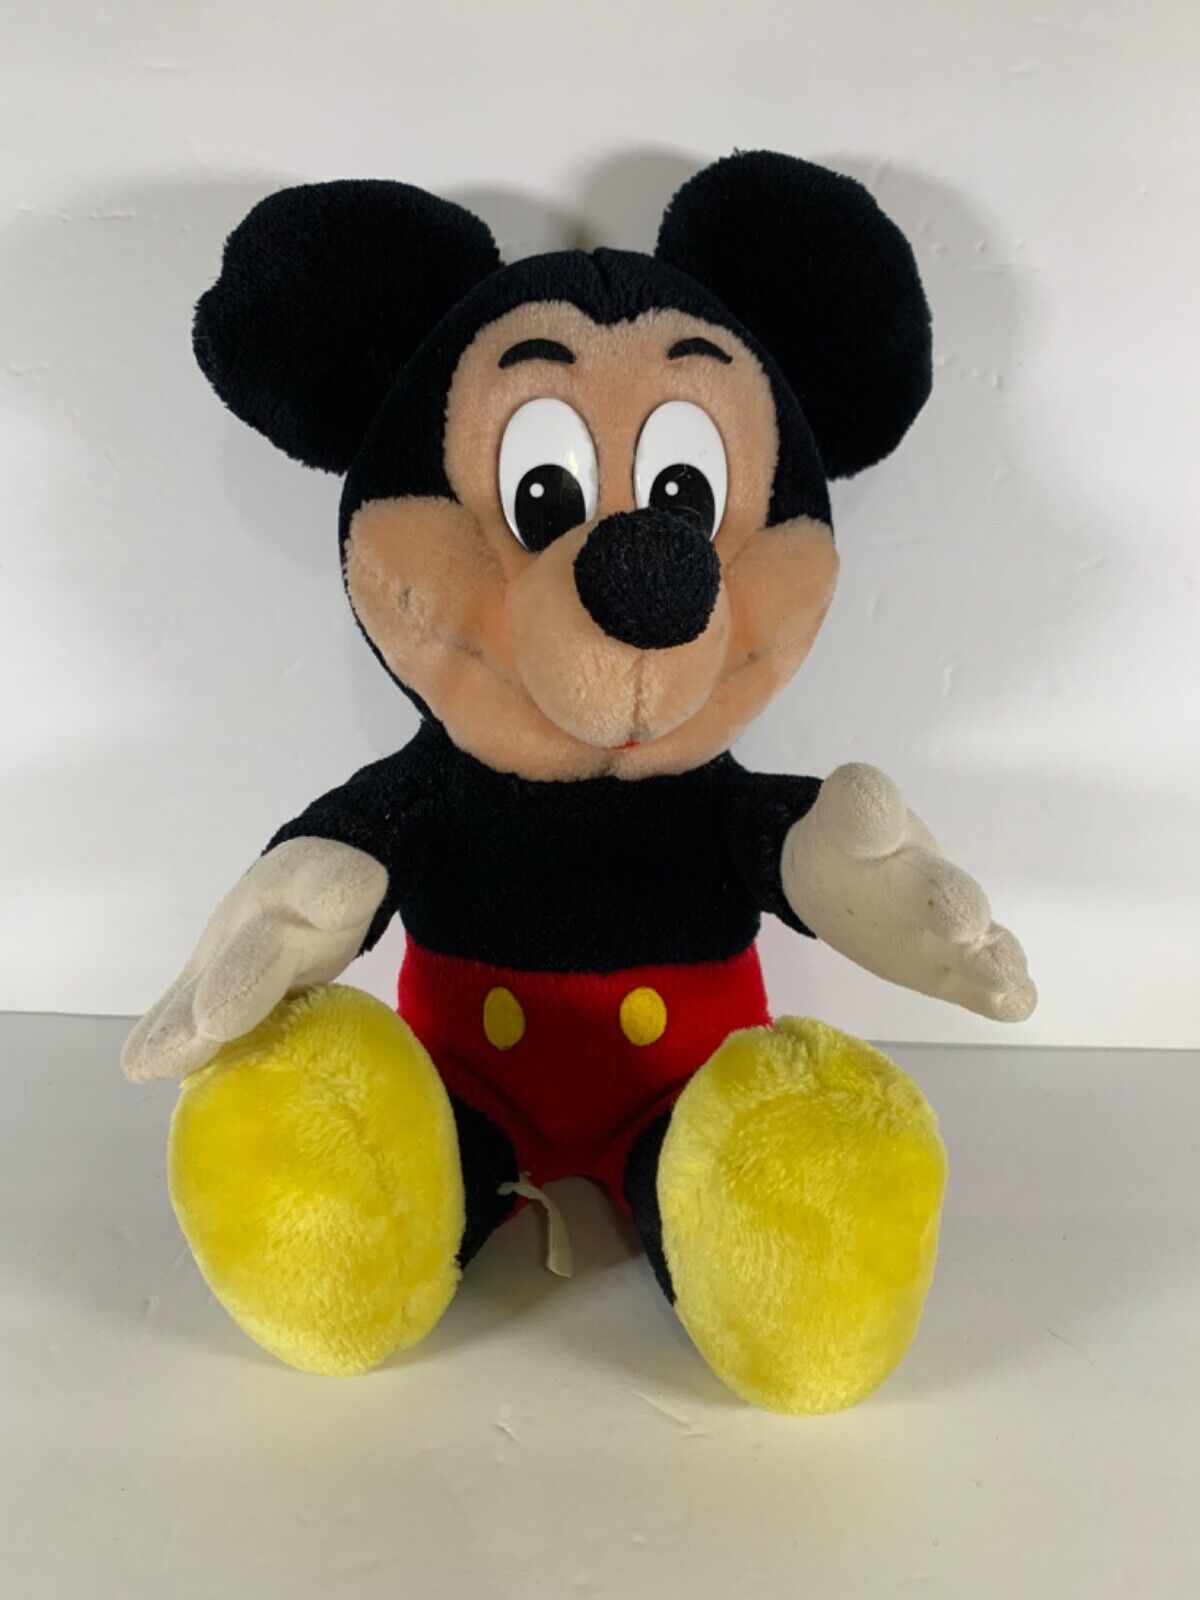 Vintage 14 in. Disney Mickey Mouse plush